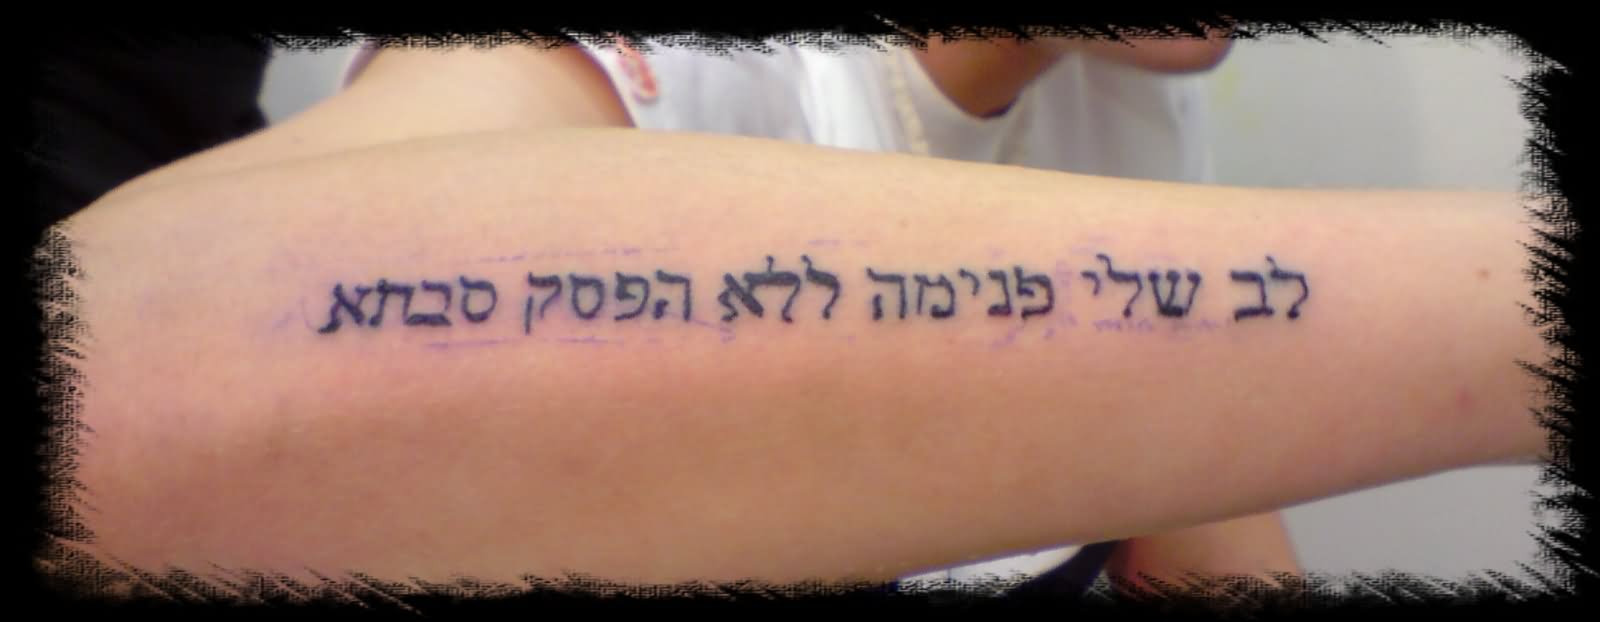 34+ Awesome Hebrew Tattoos